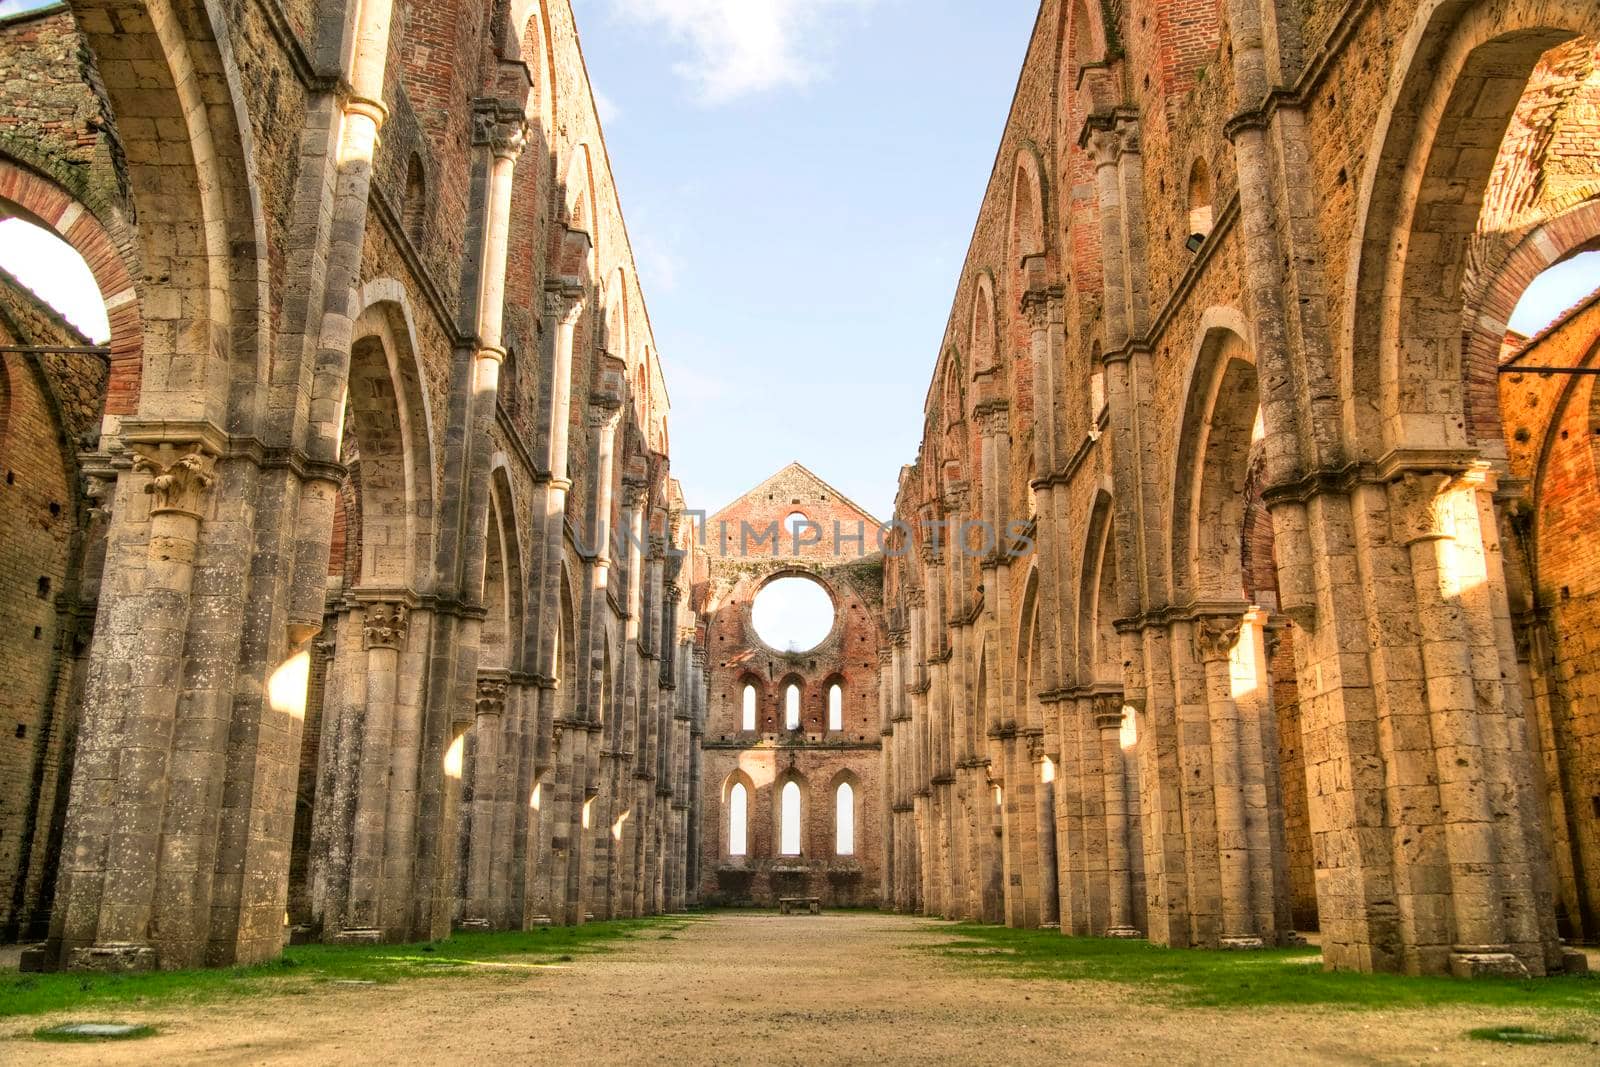 Photo shoot of the famous roofless church of San Galgano in the lands near Siena Italy 